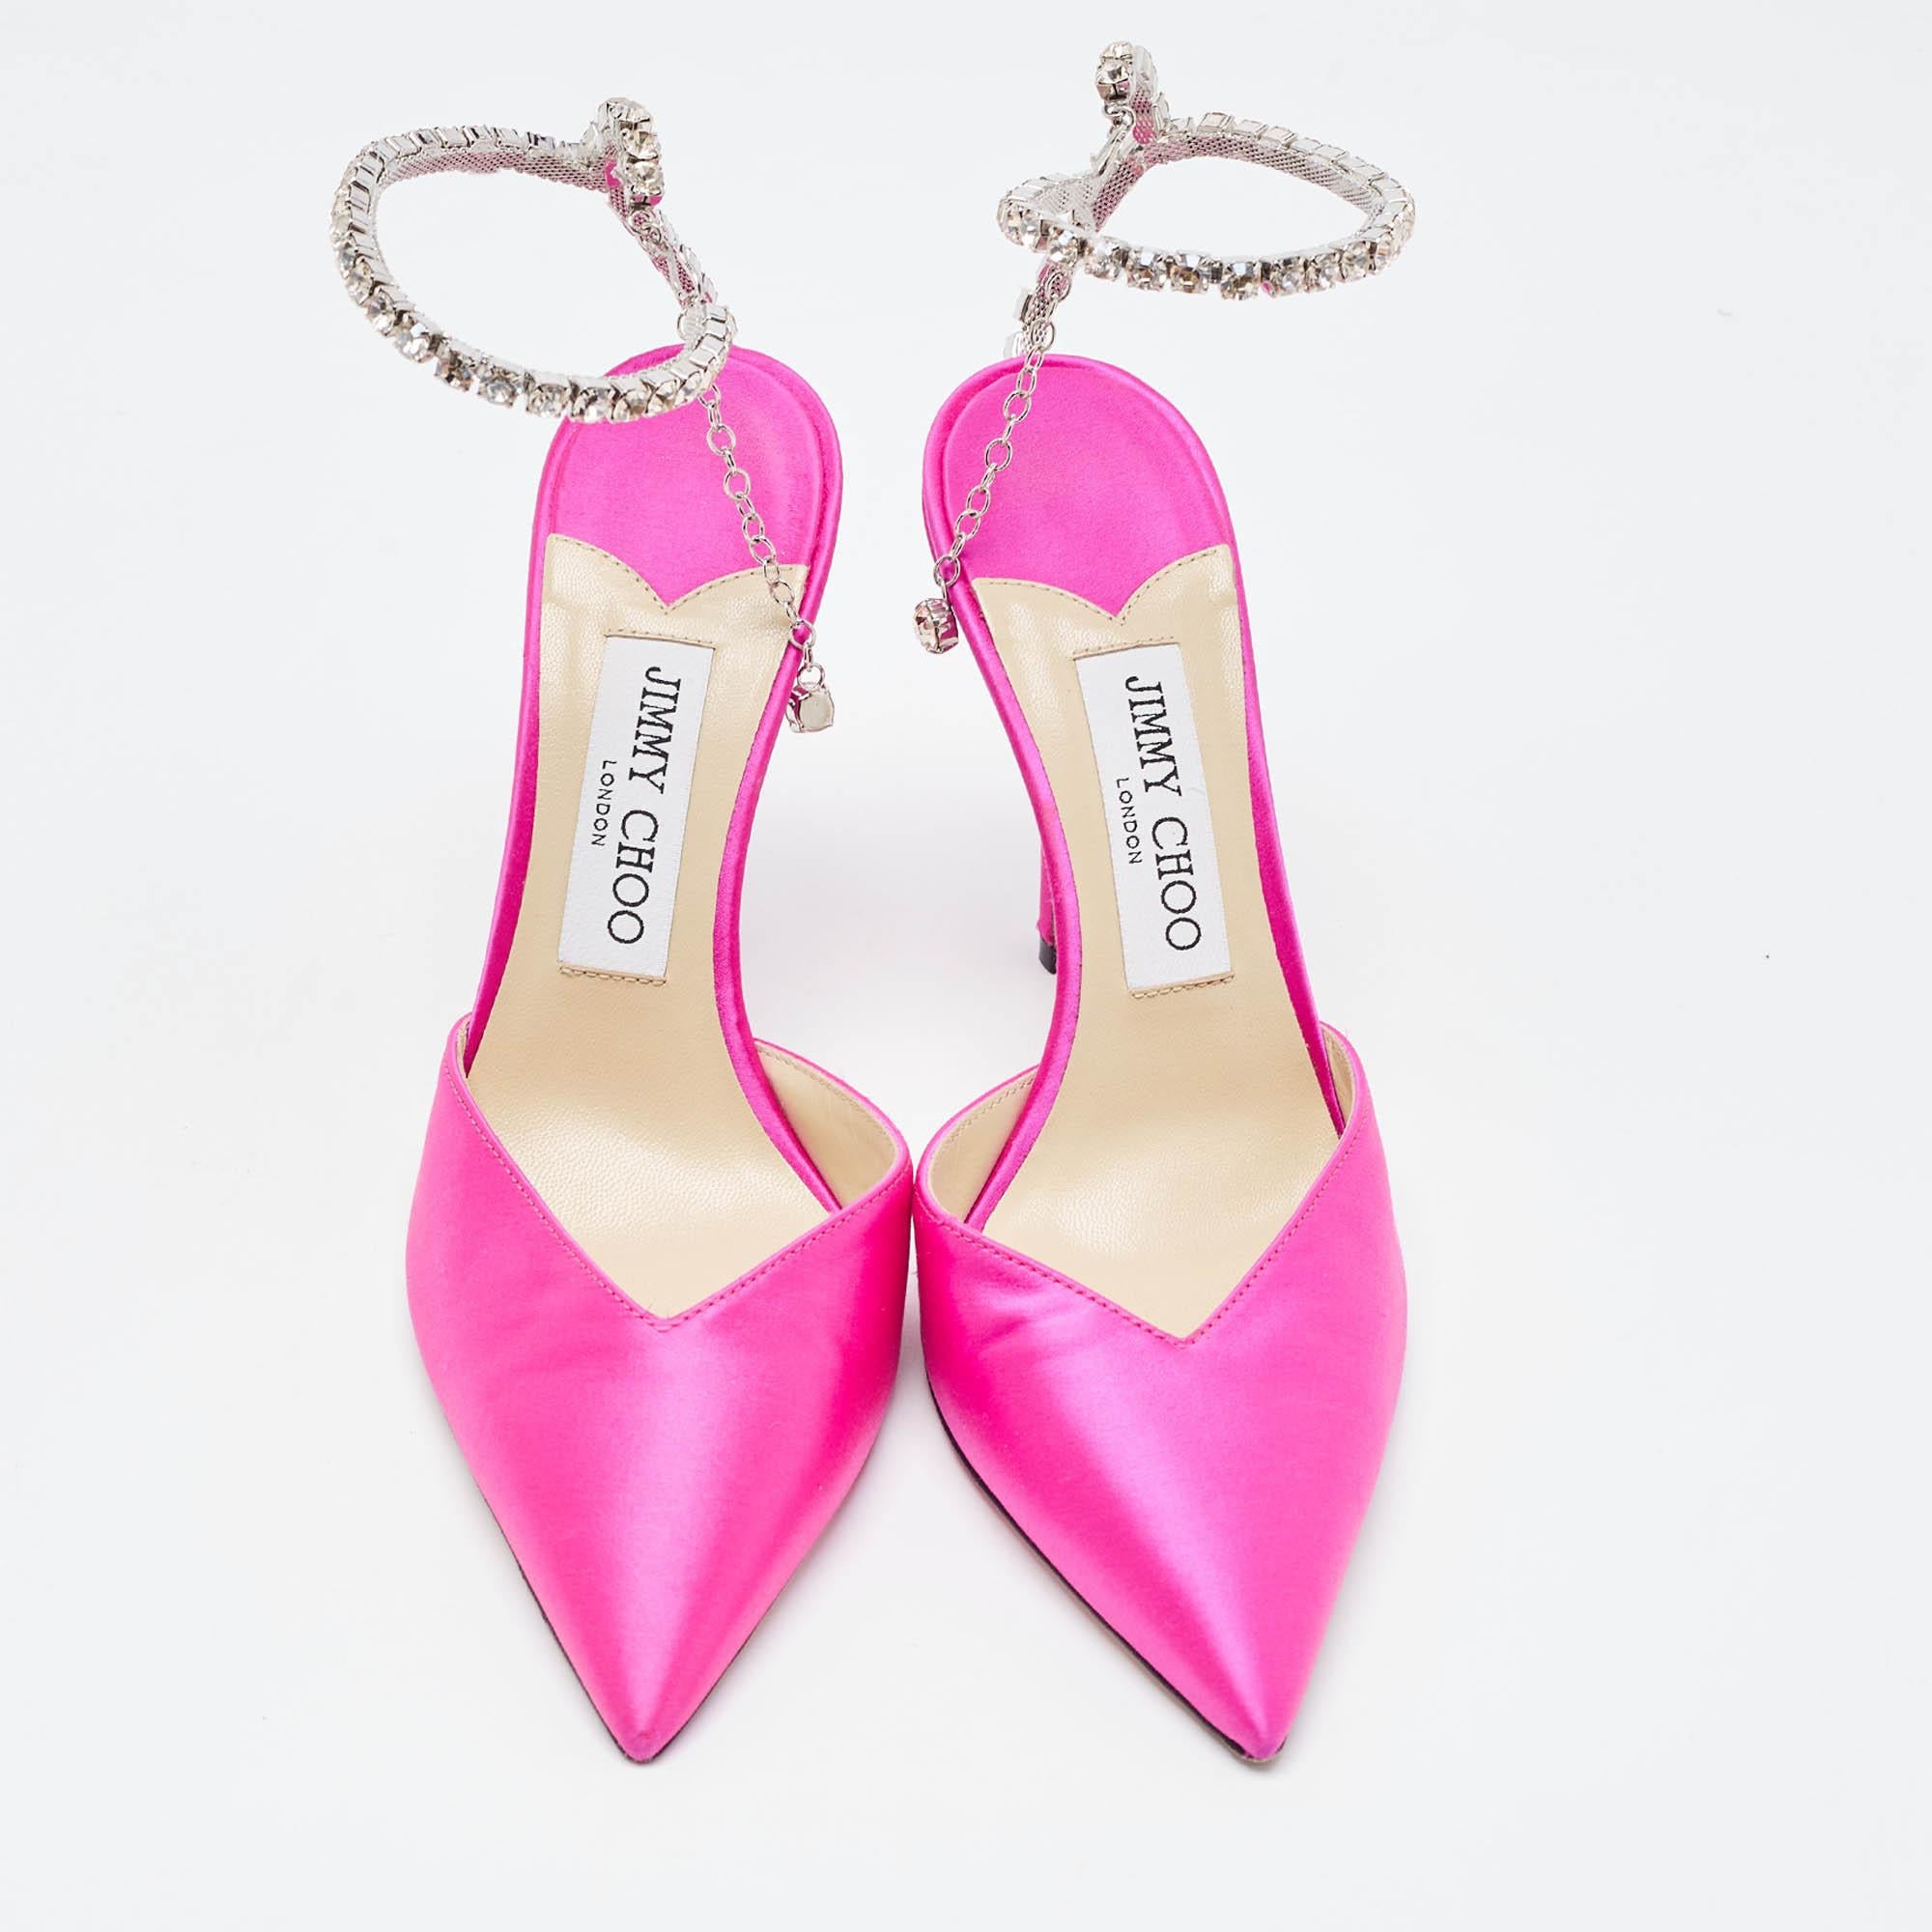 Complement your well-put-together outfit with these authentic Jimmy Choo pink shoes. Timeless and classy, they have an amazing construction for enduring quality and comfortable fit.

